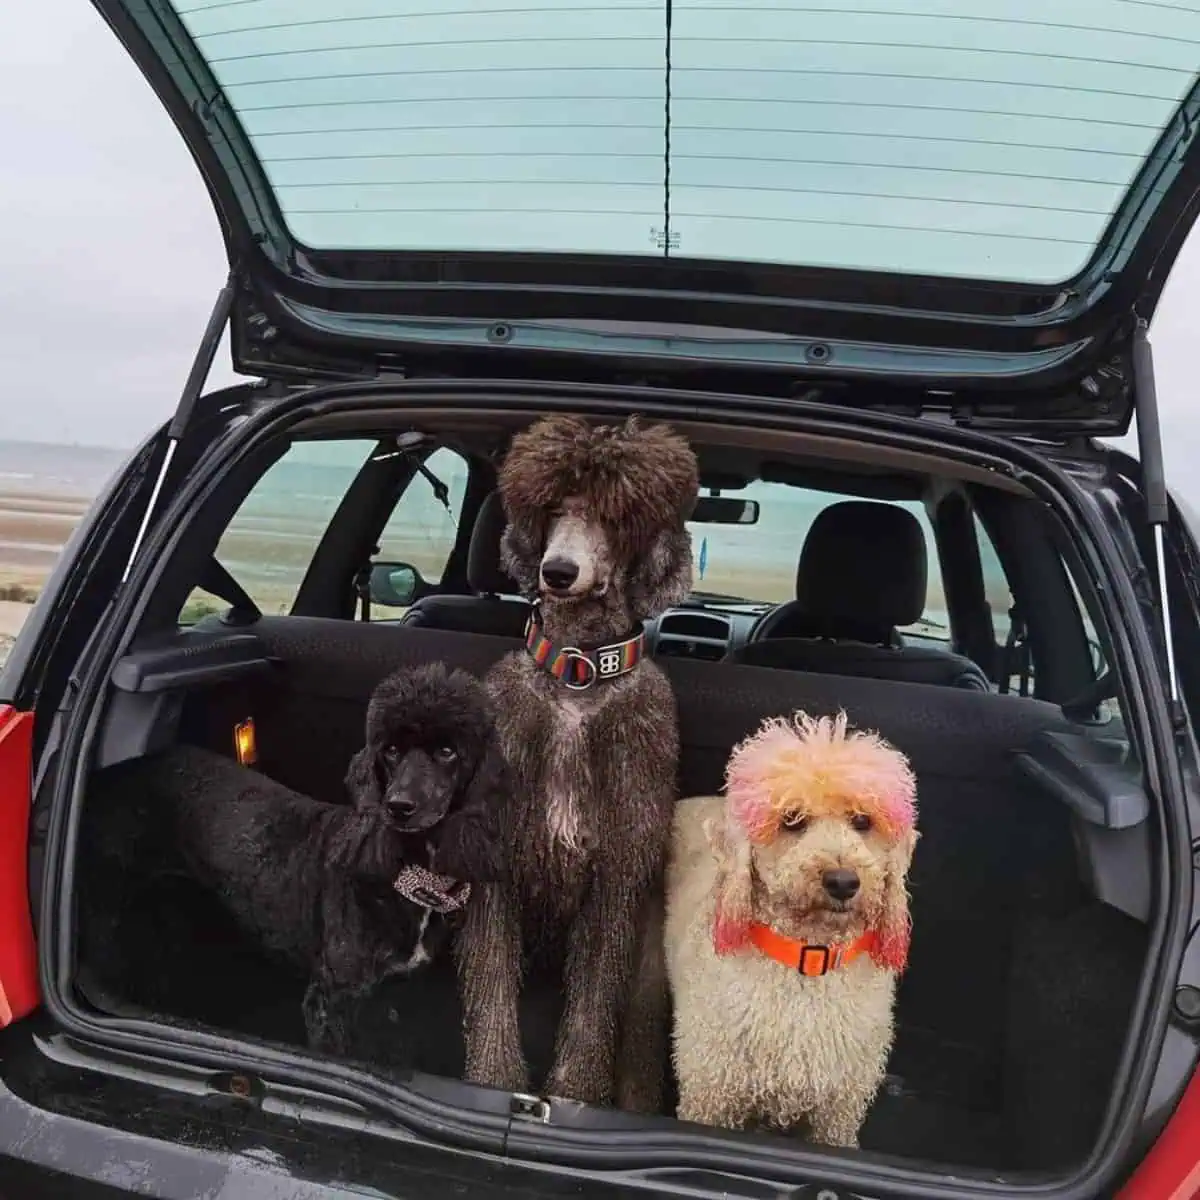 three Poodles in the car compartment